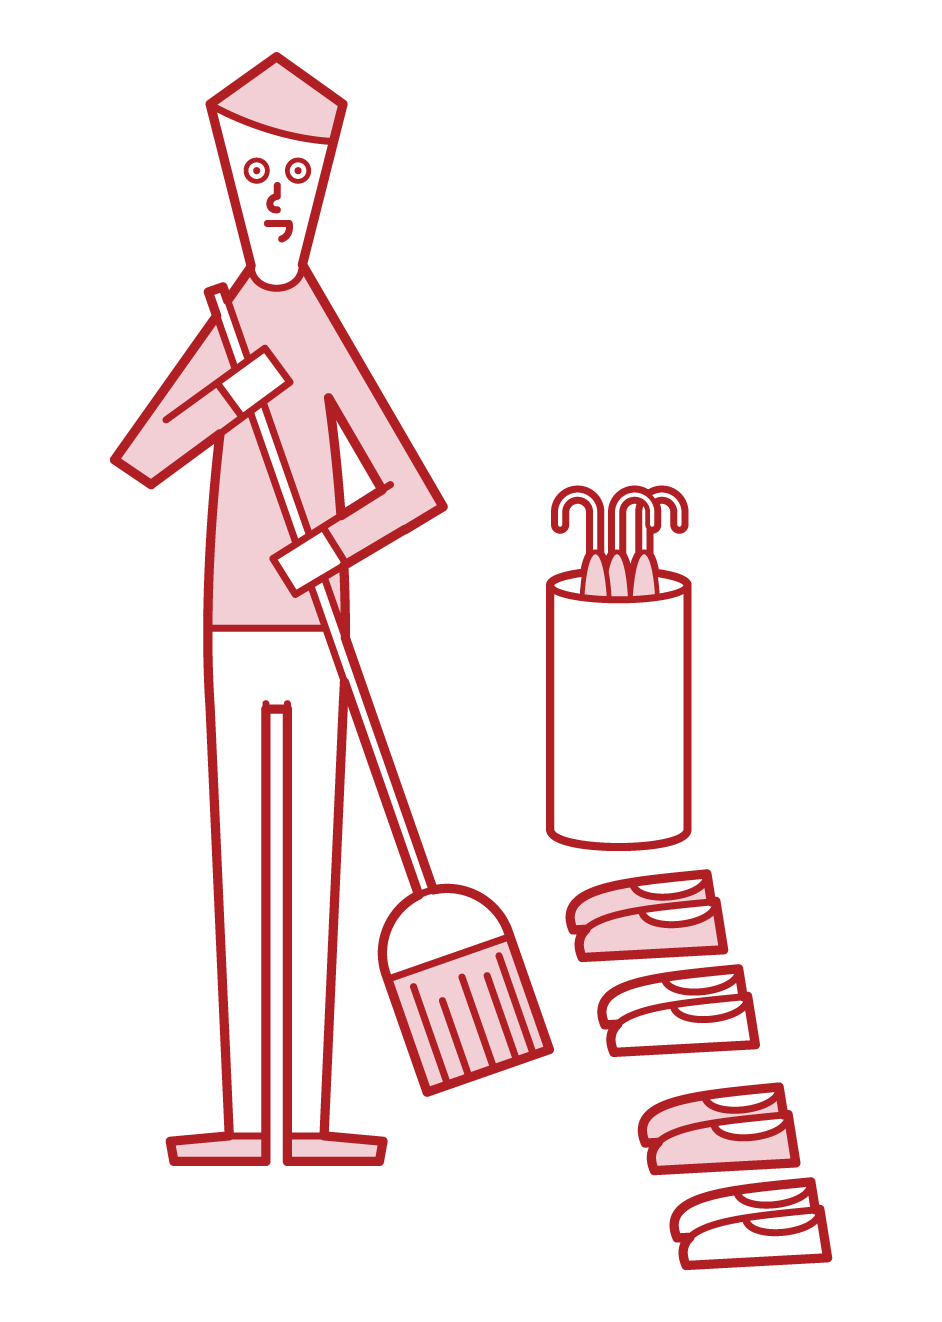 Illustration of a man cleaning the entrance